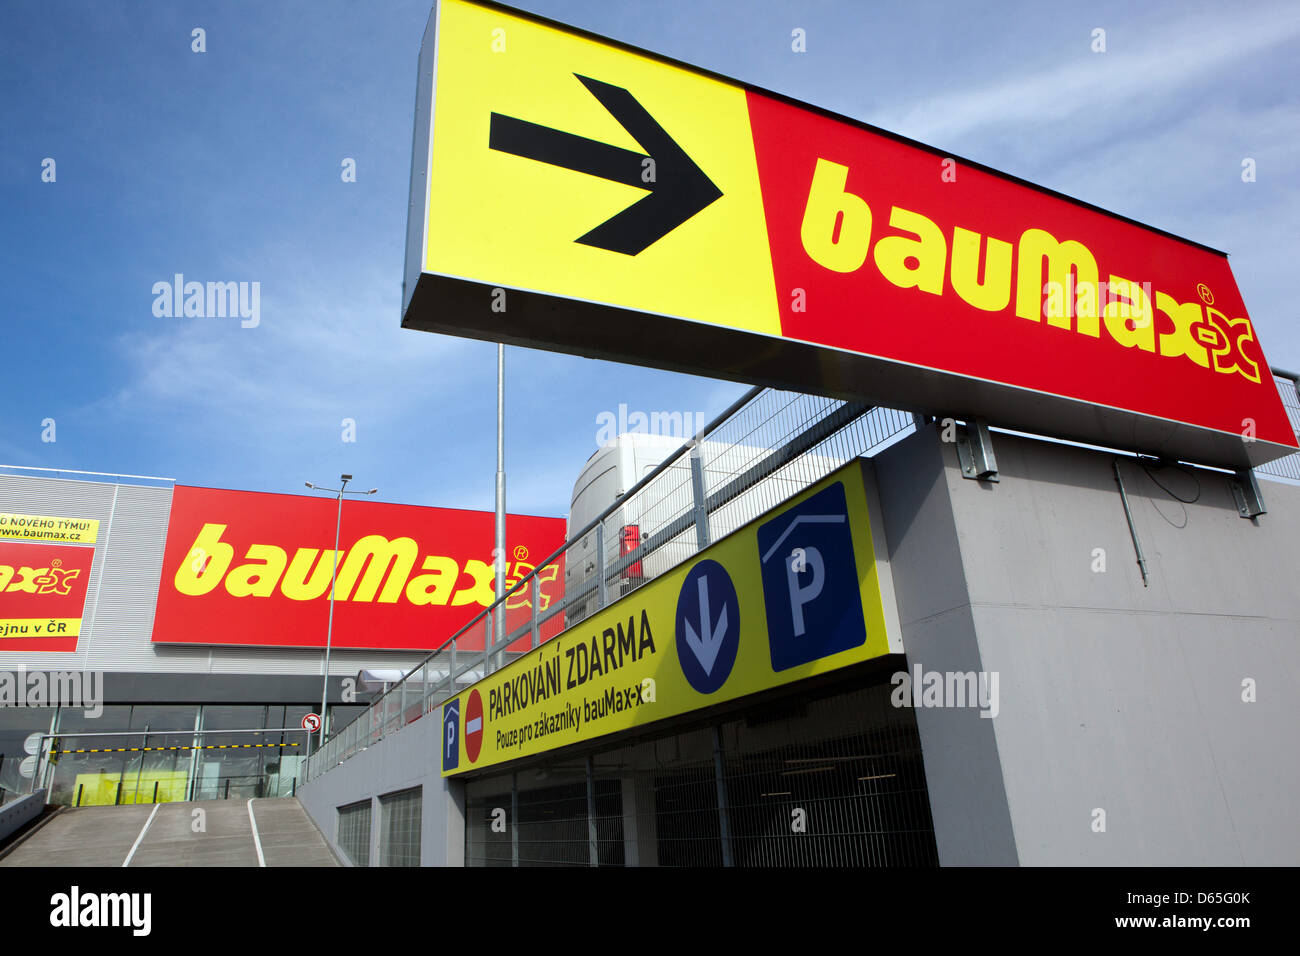 Czech Billboard High Resolution Stock Photography and Images - Alamy